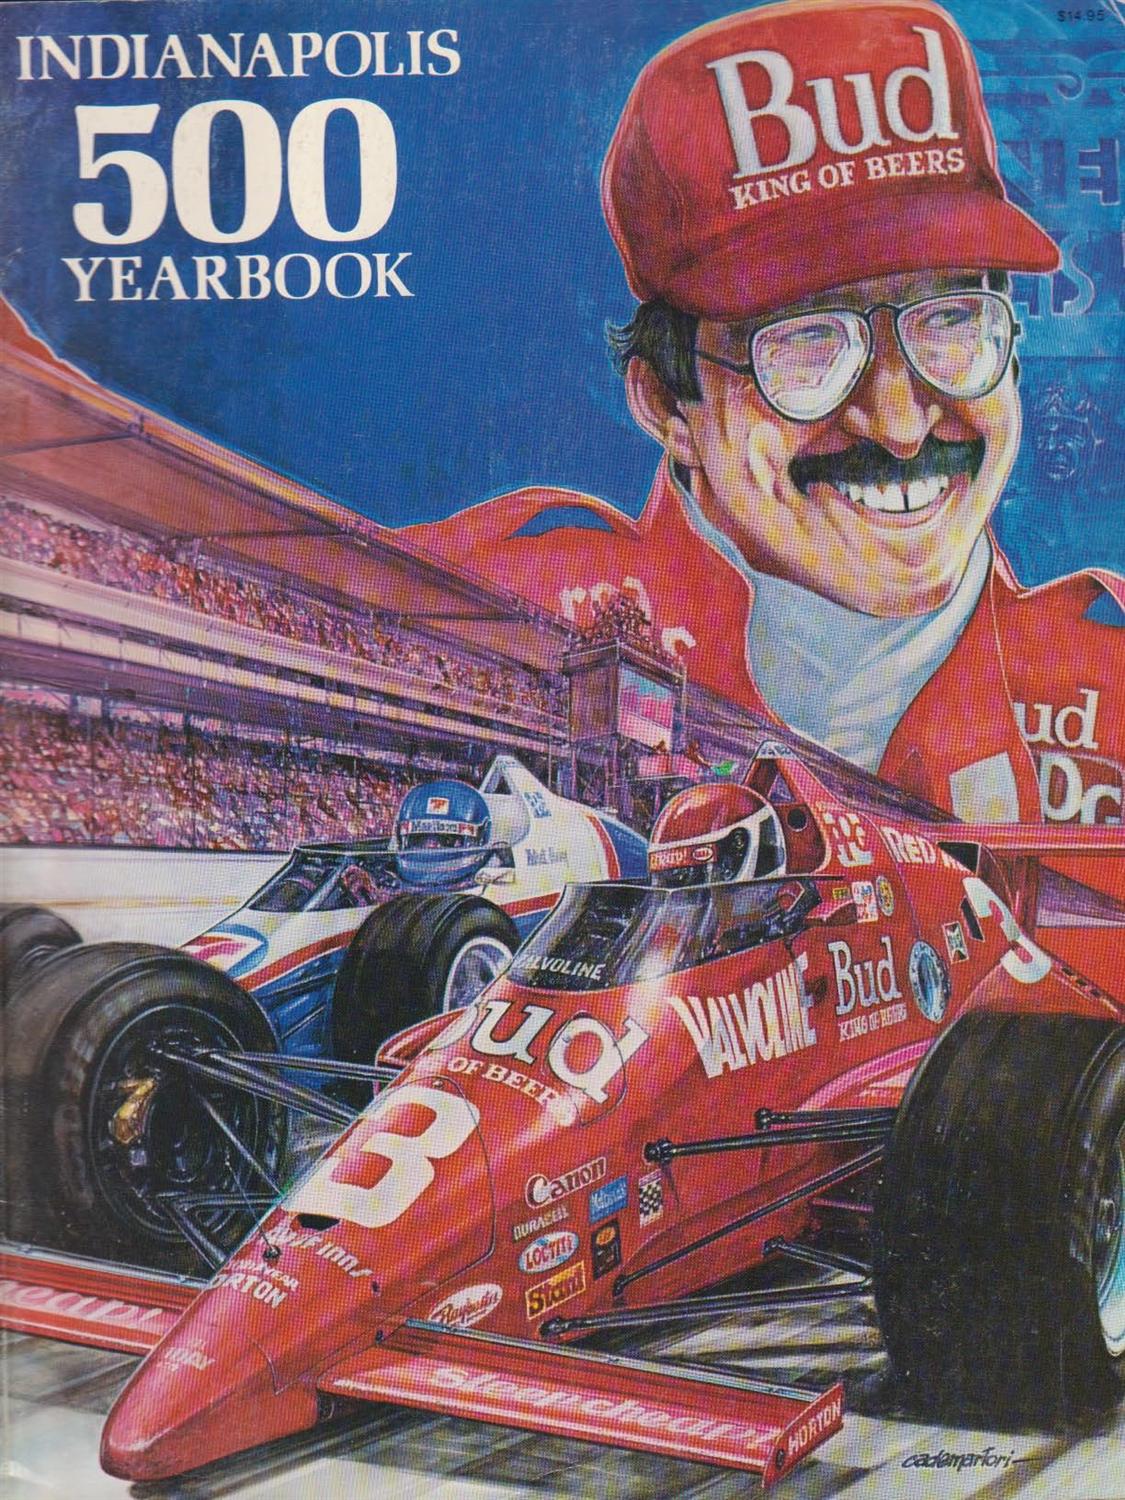 Indy 500 Annuals The Motor Racing Programme Covers Project